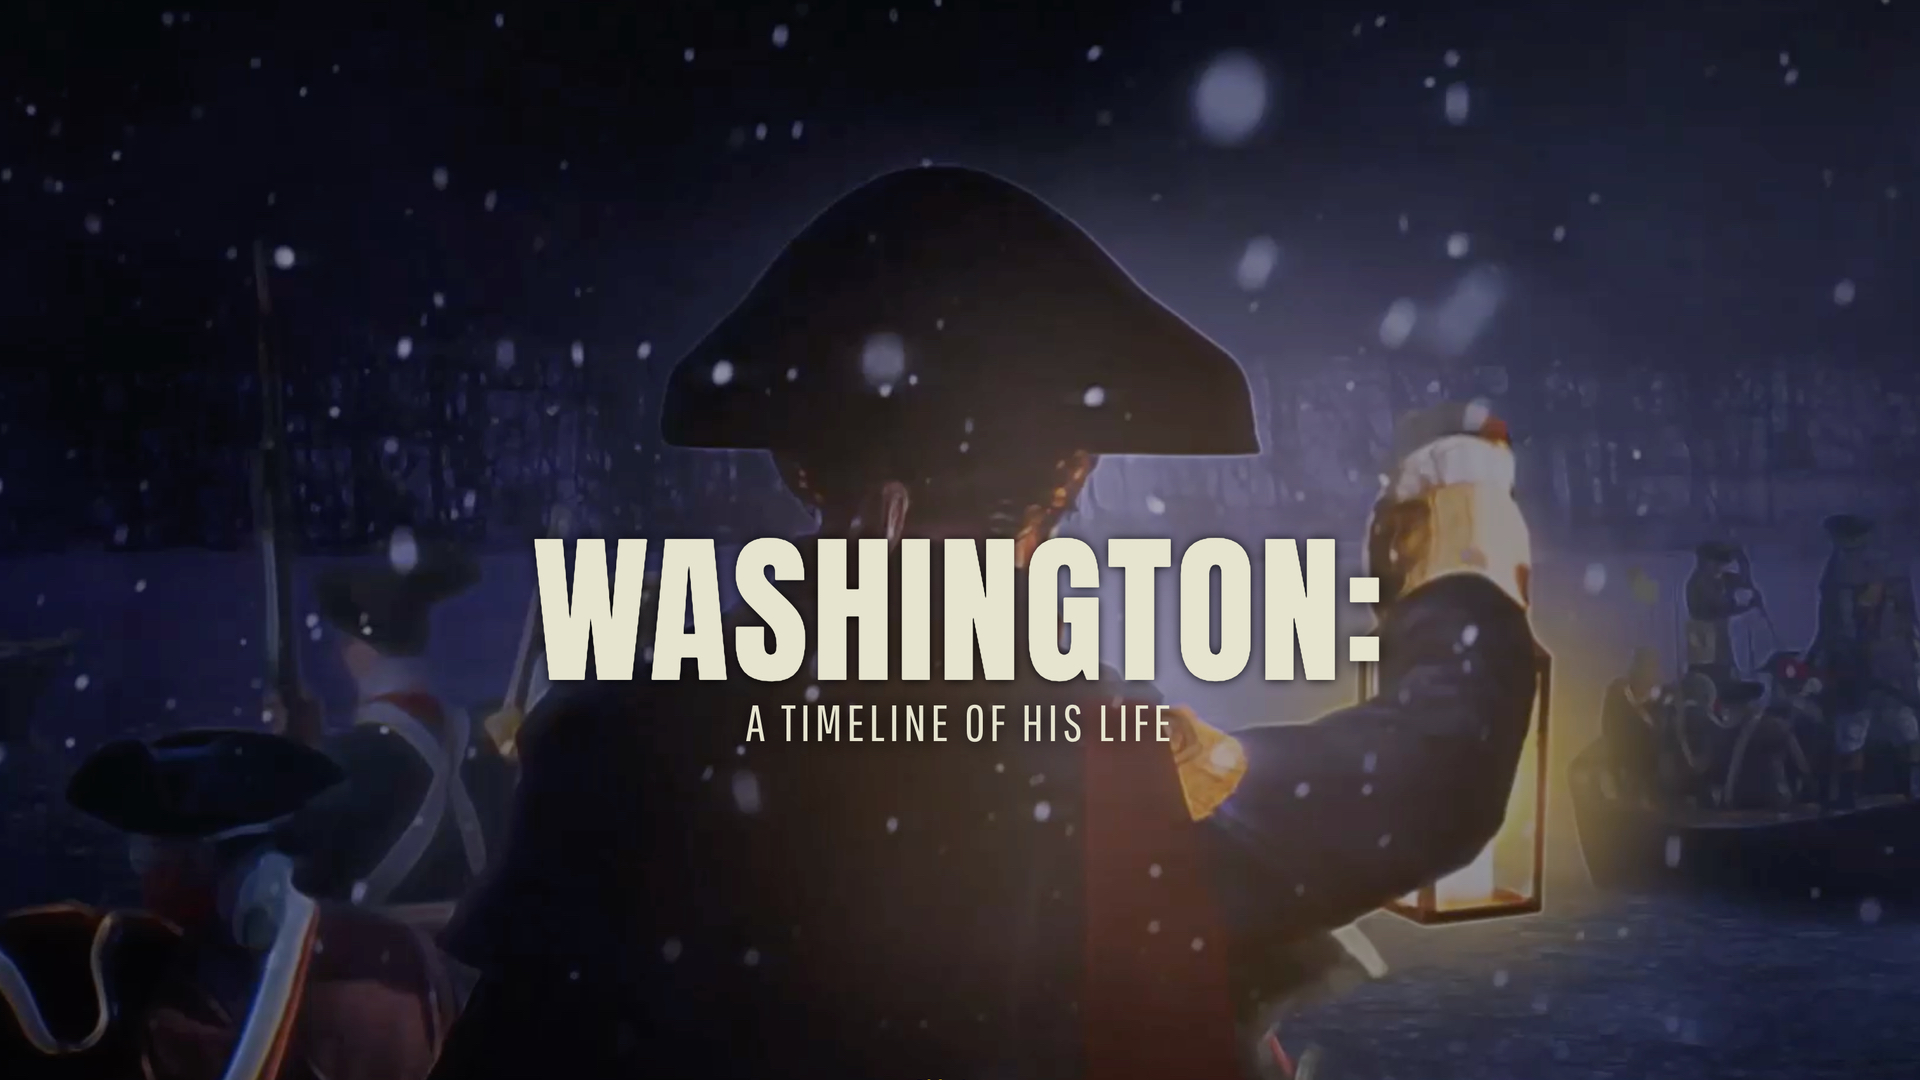 Explore More: An Interactive Timeline of George Washington's Life